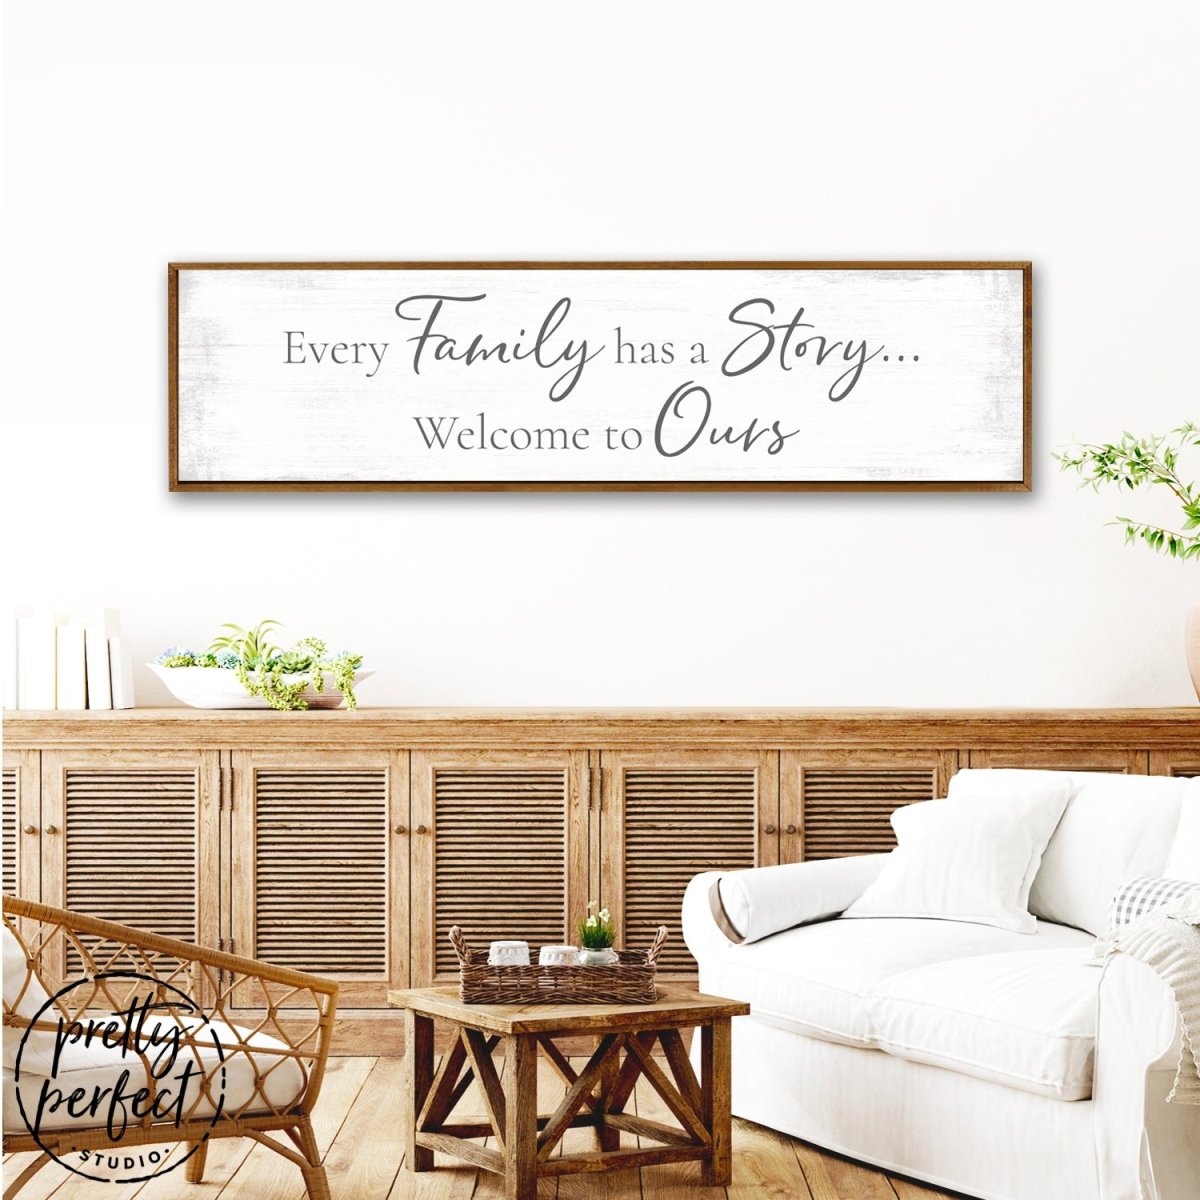 Every Family Has a Story Sign Above Entryway Table - Pretty Perfect Studio